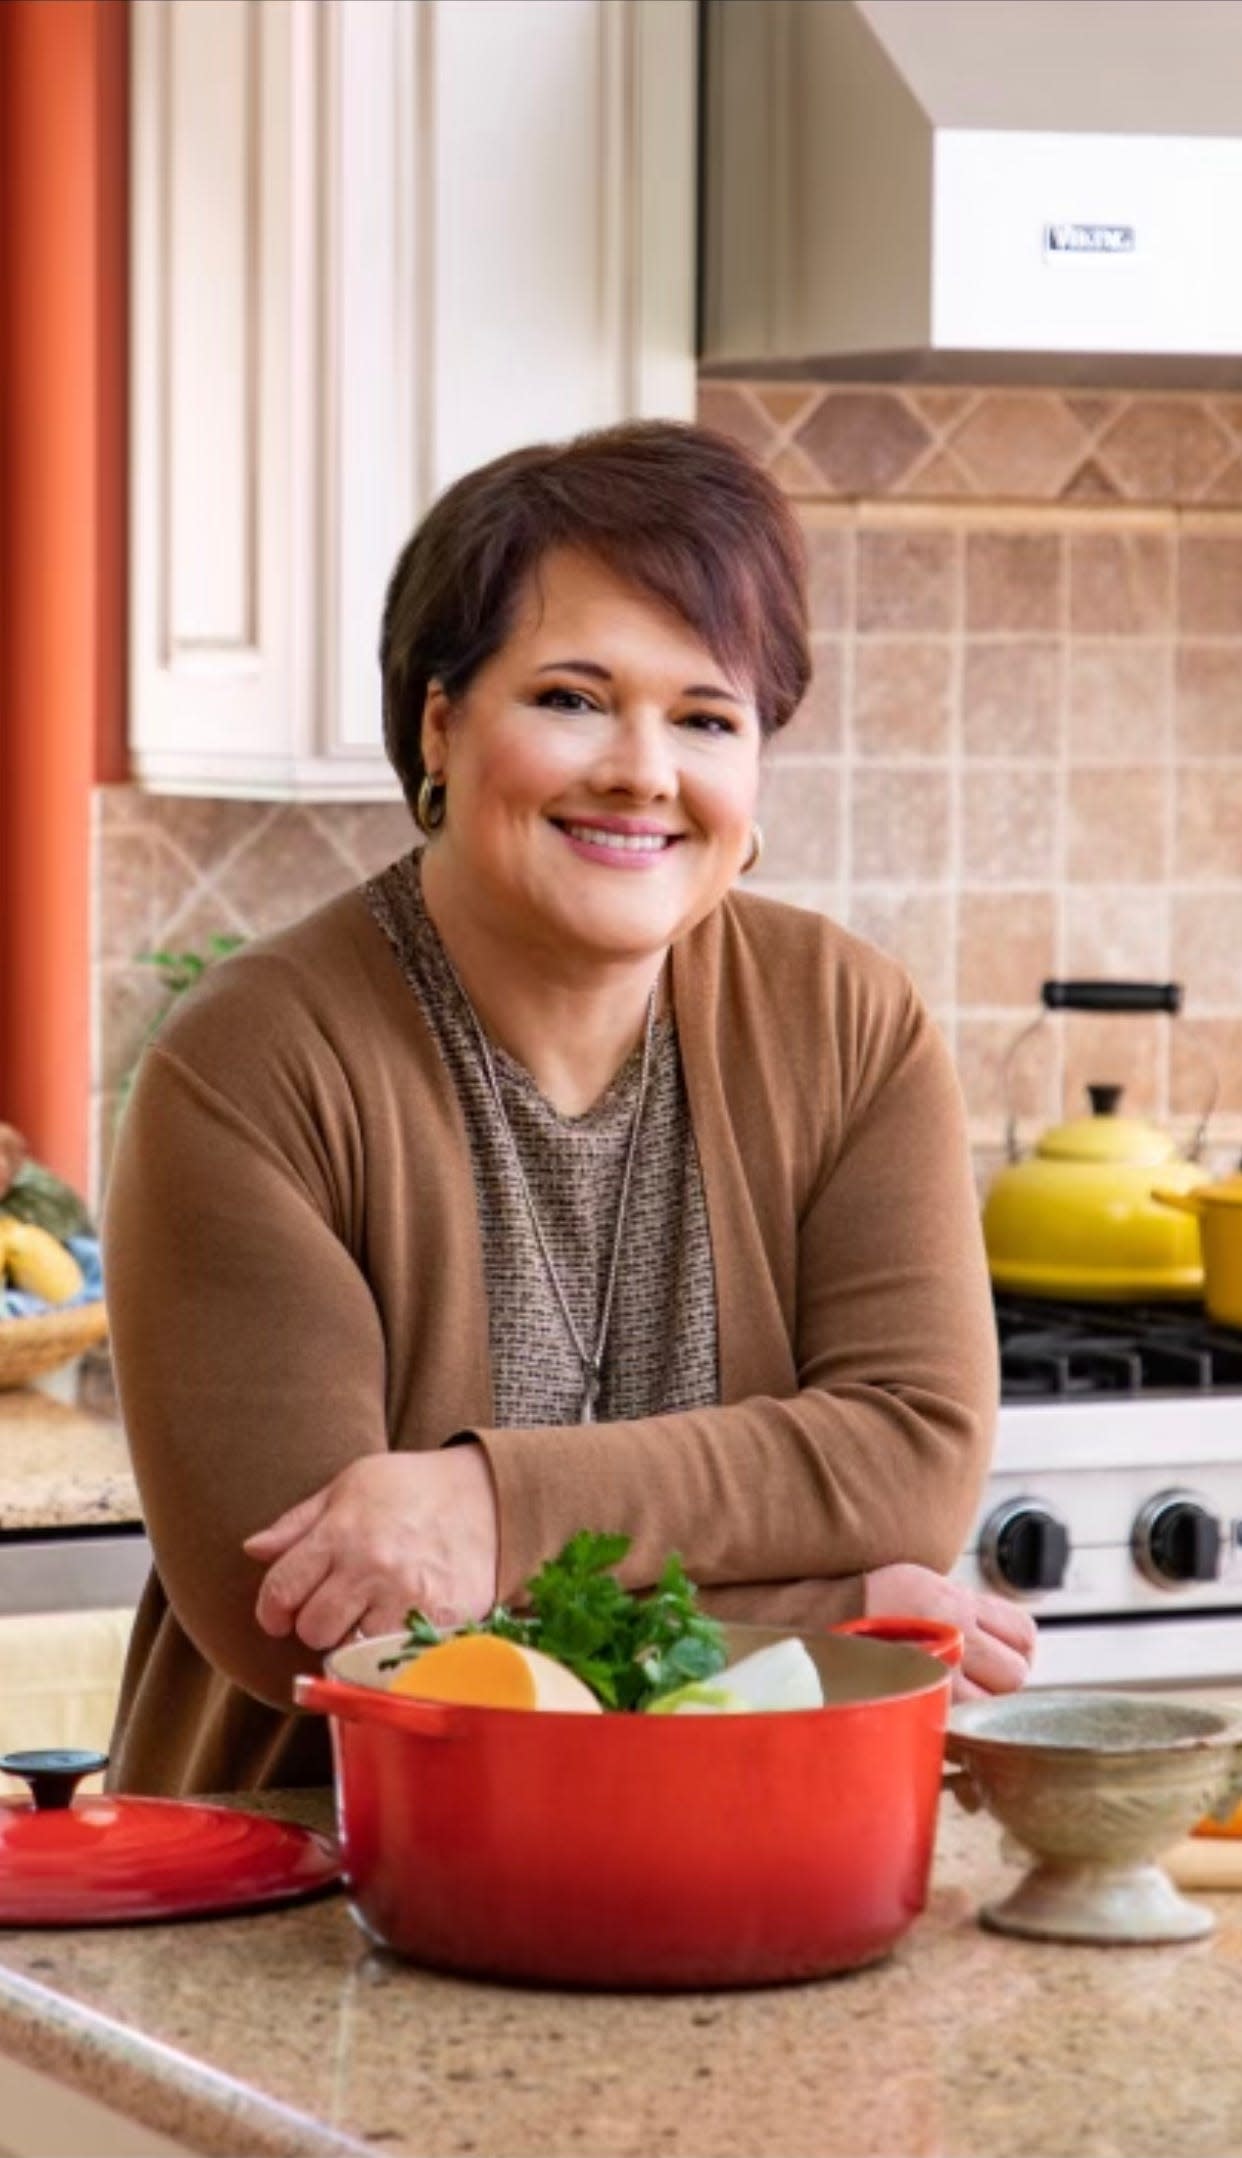 Sandra Gutierrez, award-winning journalist, author, food historian, and professional cooking instructor, is a featured guest of “Diverse Roots at the Common Table: Culinary Conversations in the American South,” scheduled for 6 p.m. March 27 at UNC-Asheville.